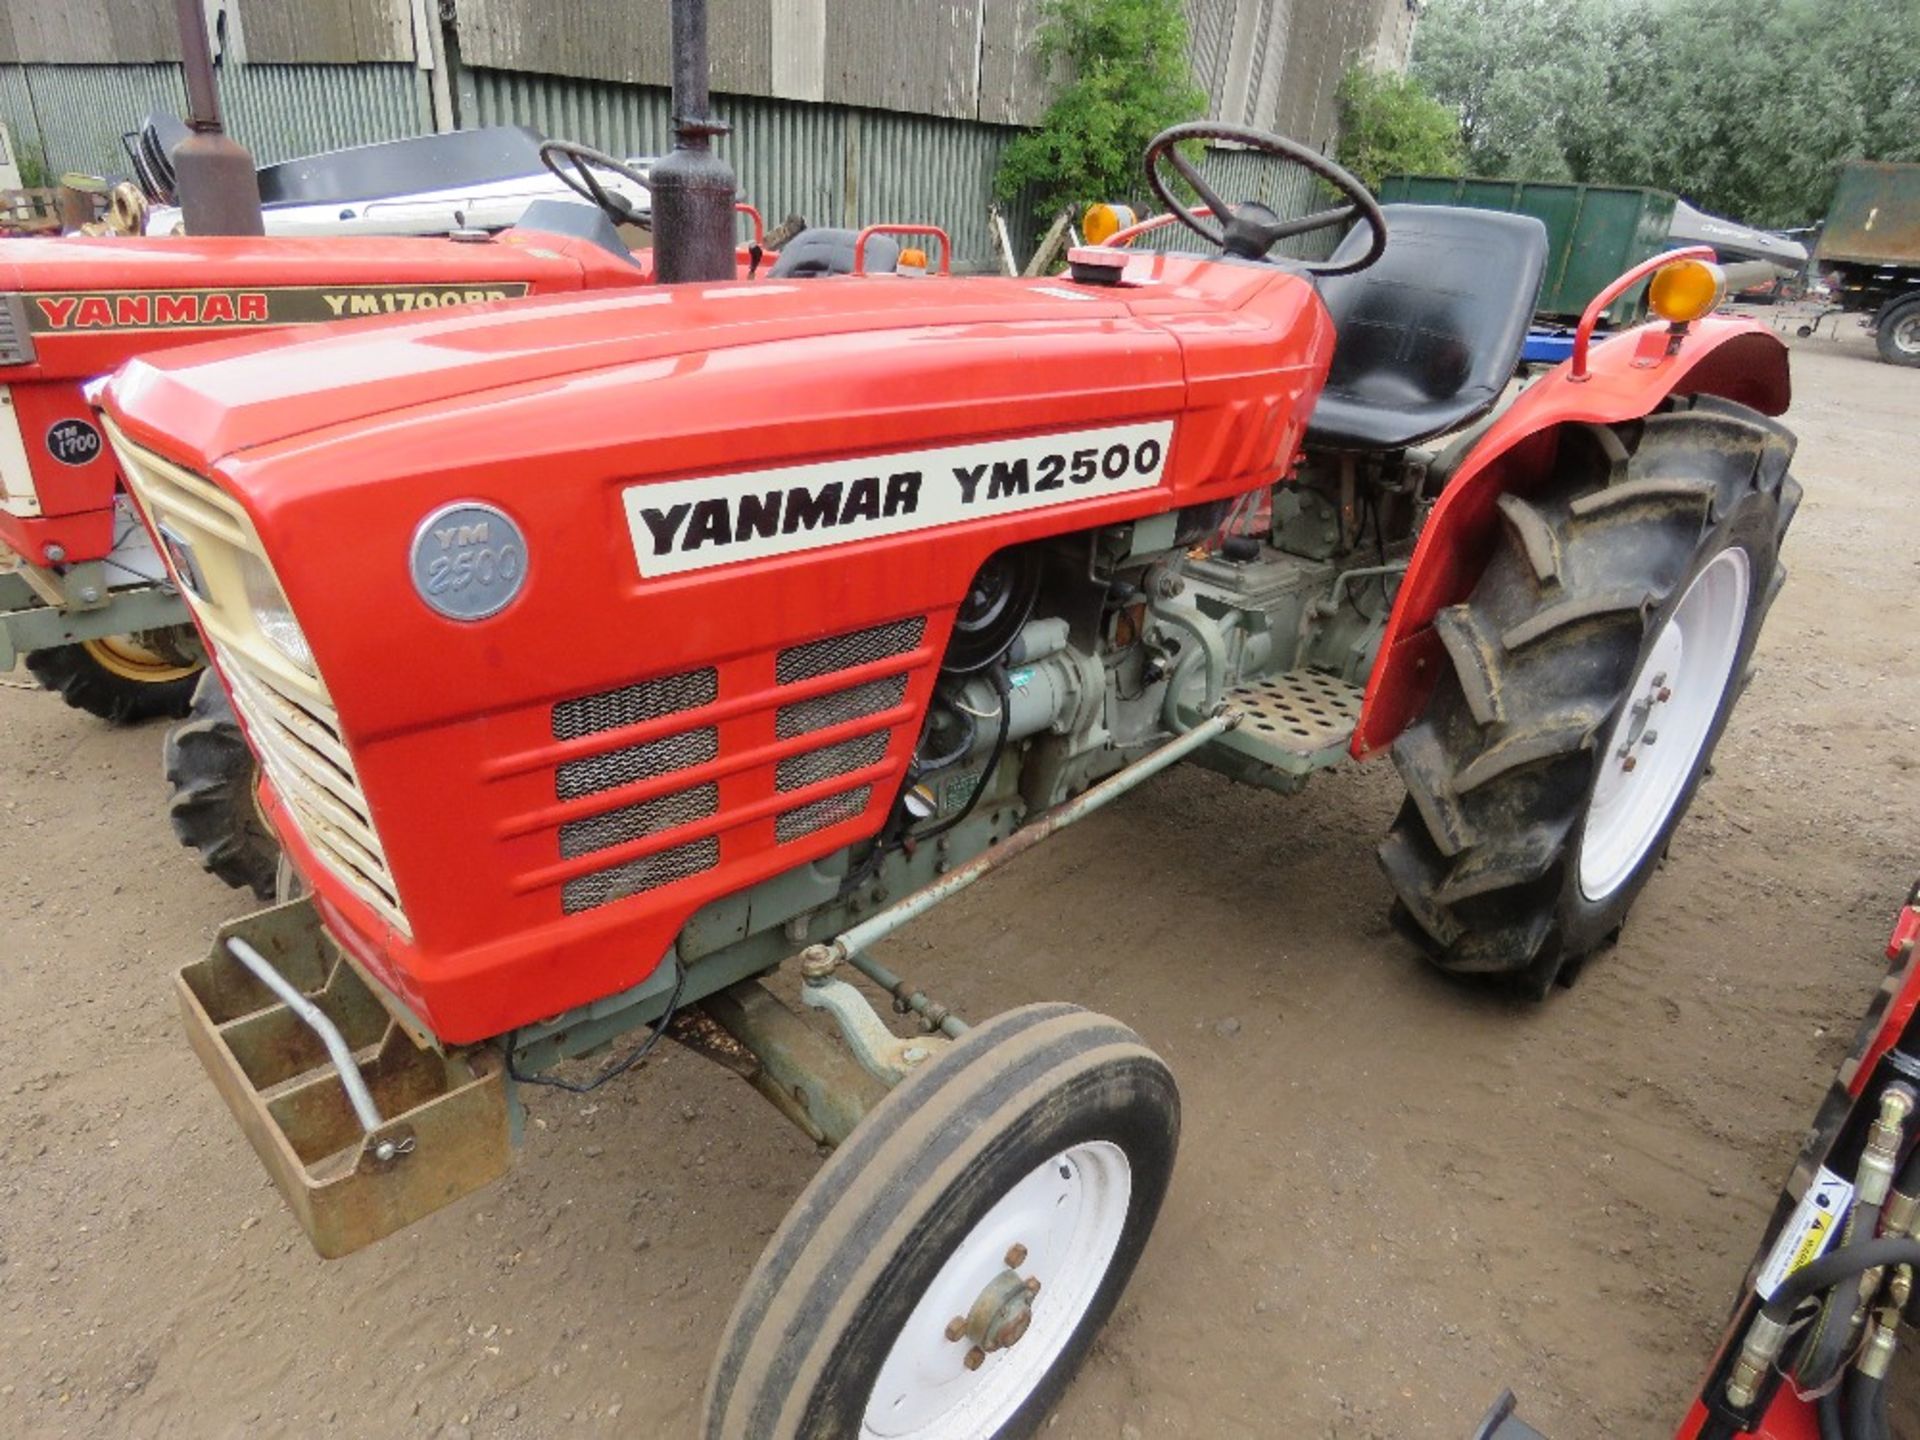 YANMAR YM2500 2WD COMPACT 25HP AGRICULTURAL TRACTOR WITH REAR LINK ARMS. WHEN TESTED WAS SEEN TO DRI - Image 3 of 7